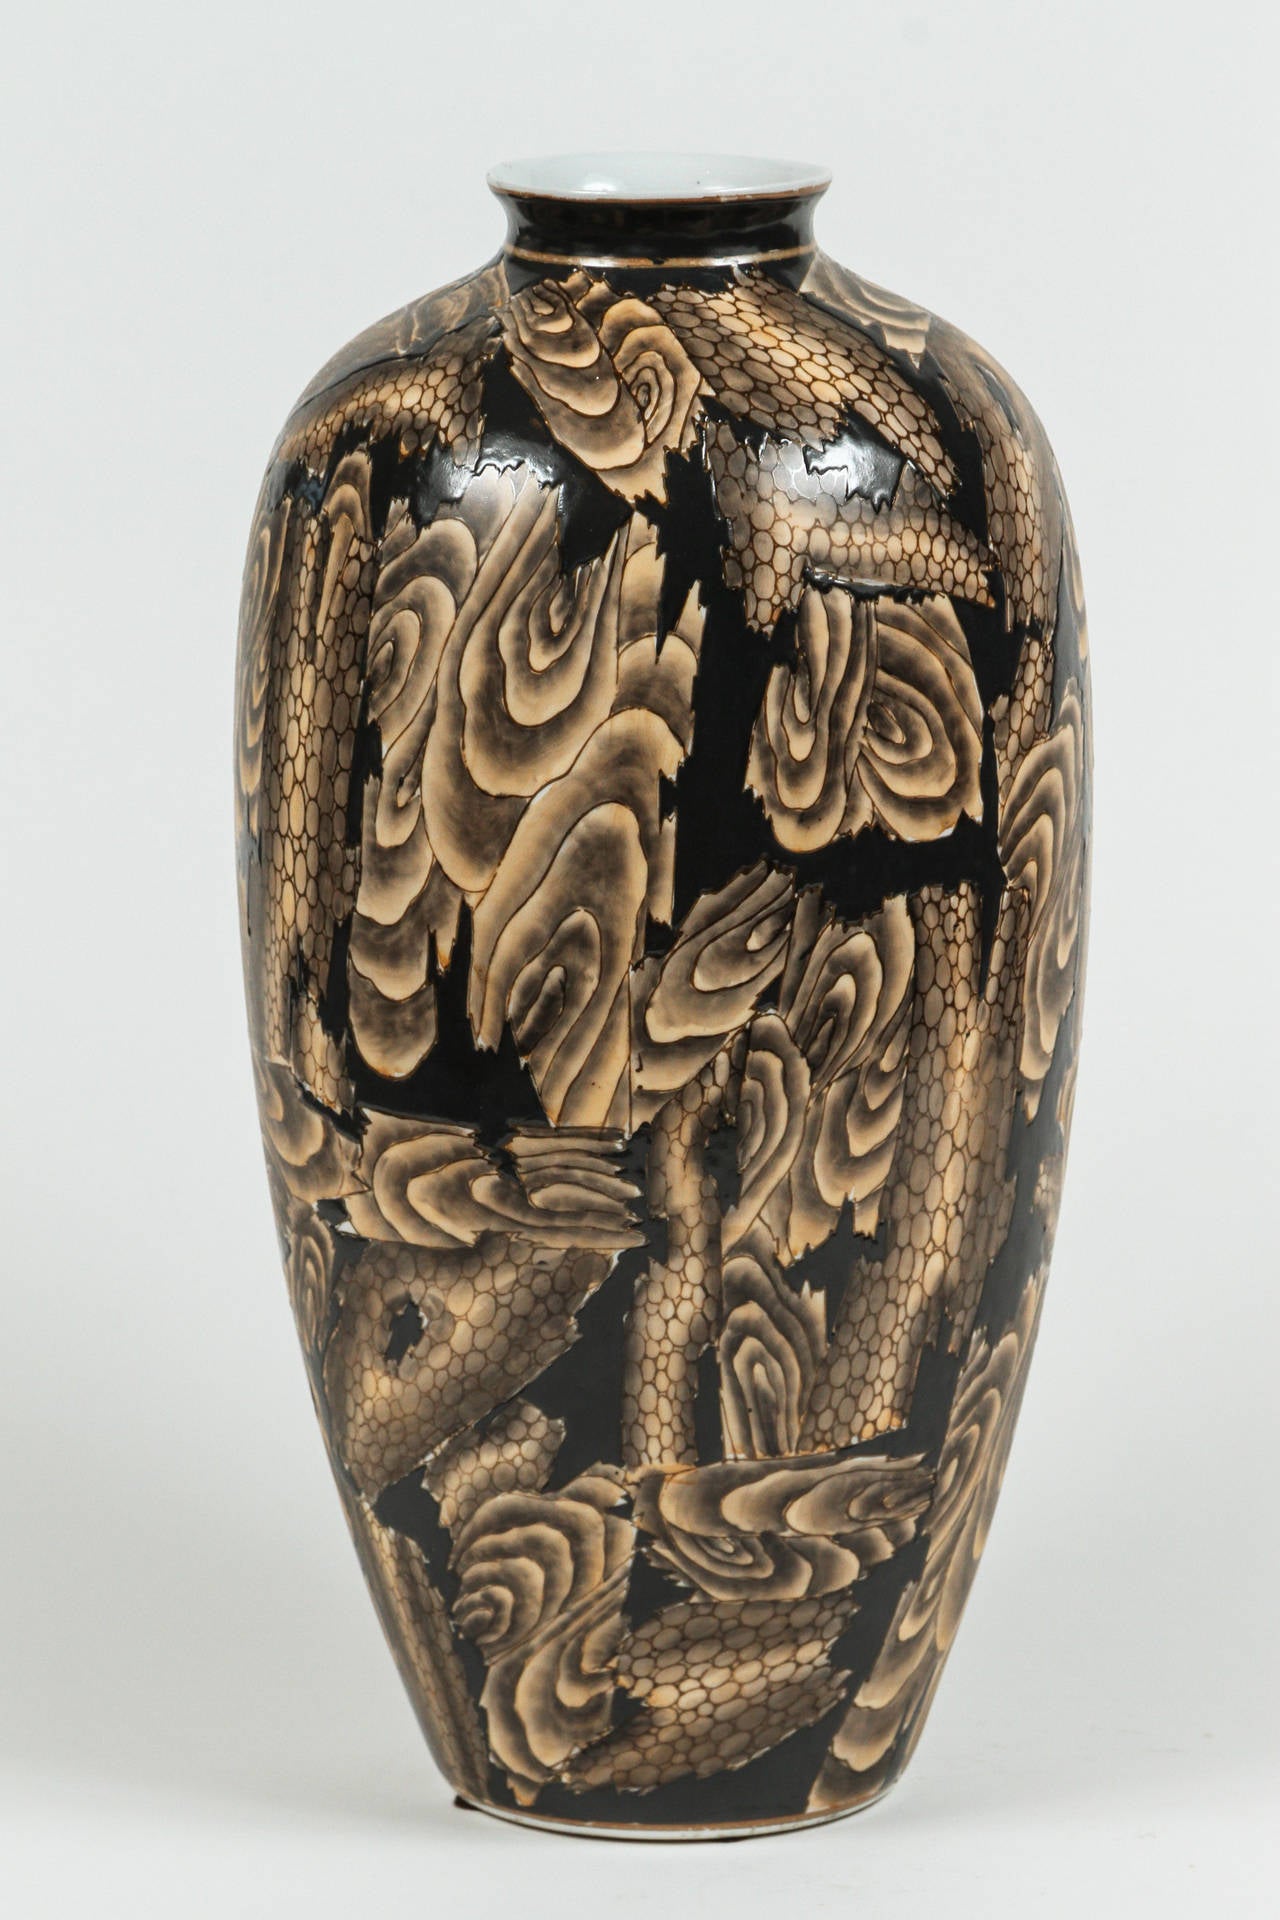 Very unique tall Japanese vase with abstract pattern in a variety of brown tones. The deepest brown glaze is raised, giving the vase a wonderful tactile texture.